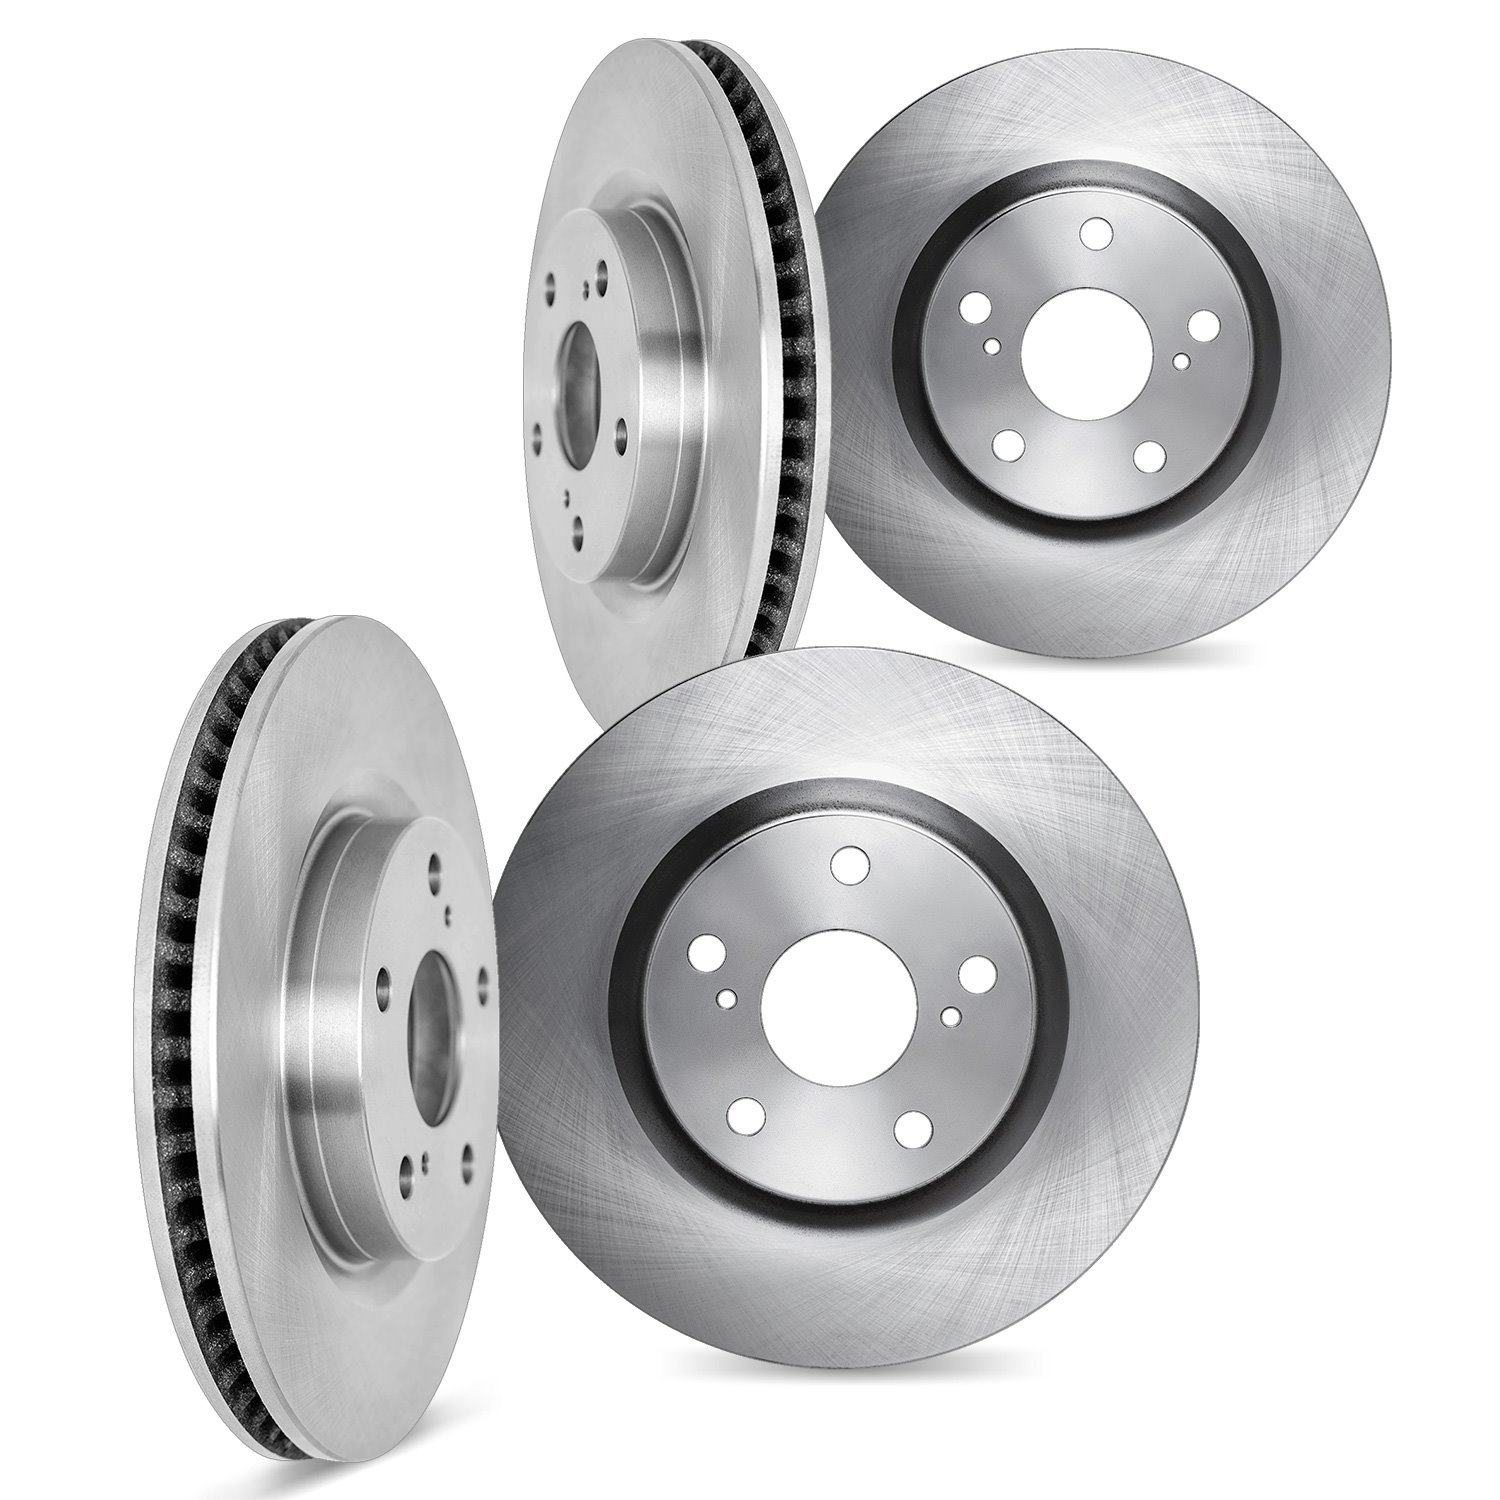 6004-54340 Brake Rotors, Fits Select Ford/Lincoln/Mercury/Mazda, Position: Front and Rear